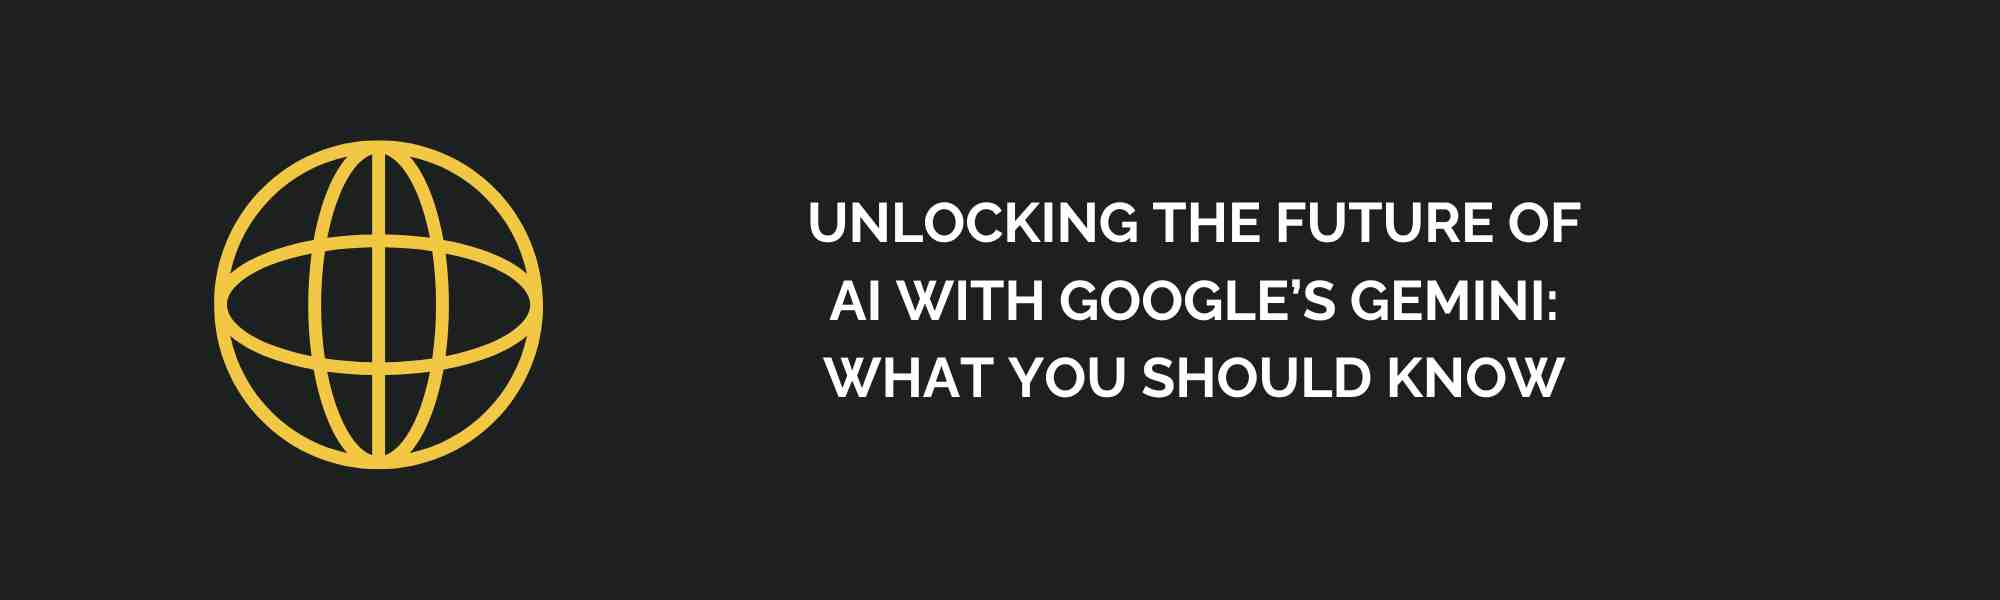 Unlocking the Future of AI with Google’s Gemini: What You Should Know